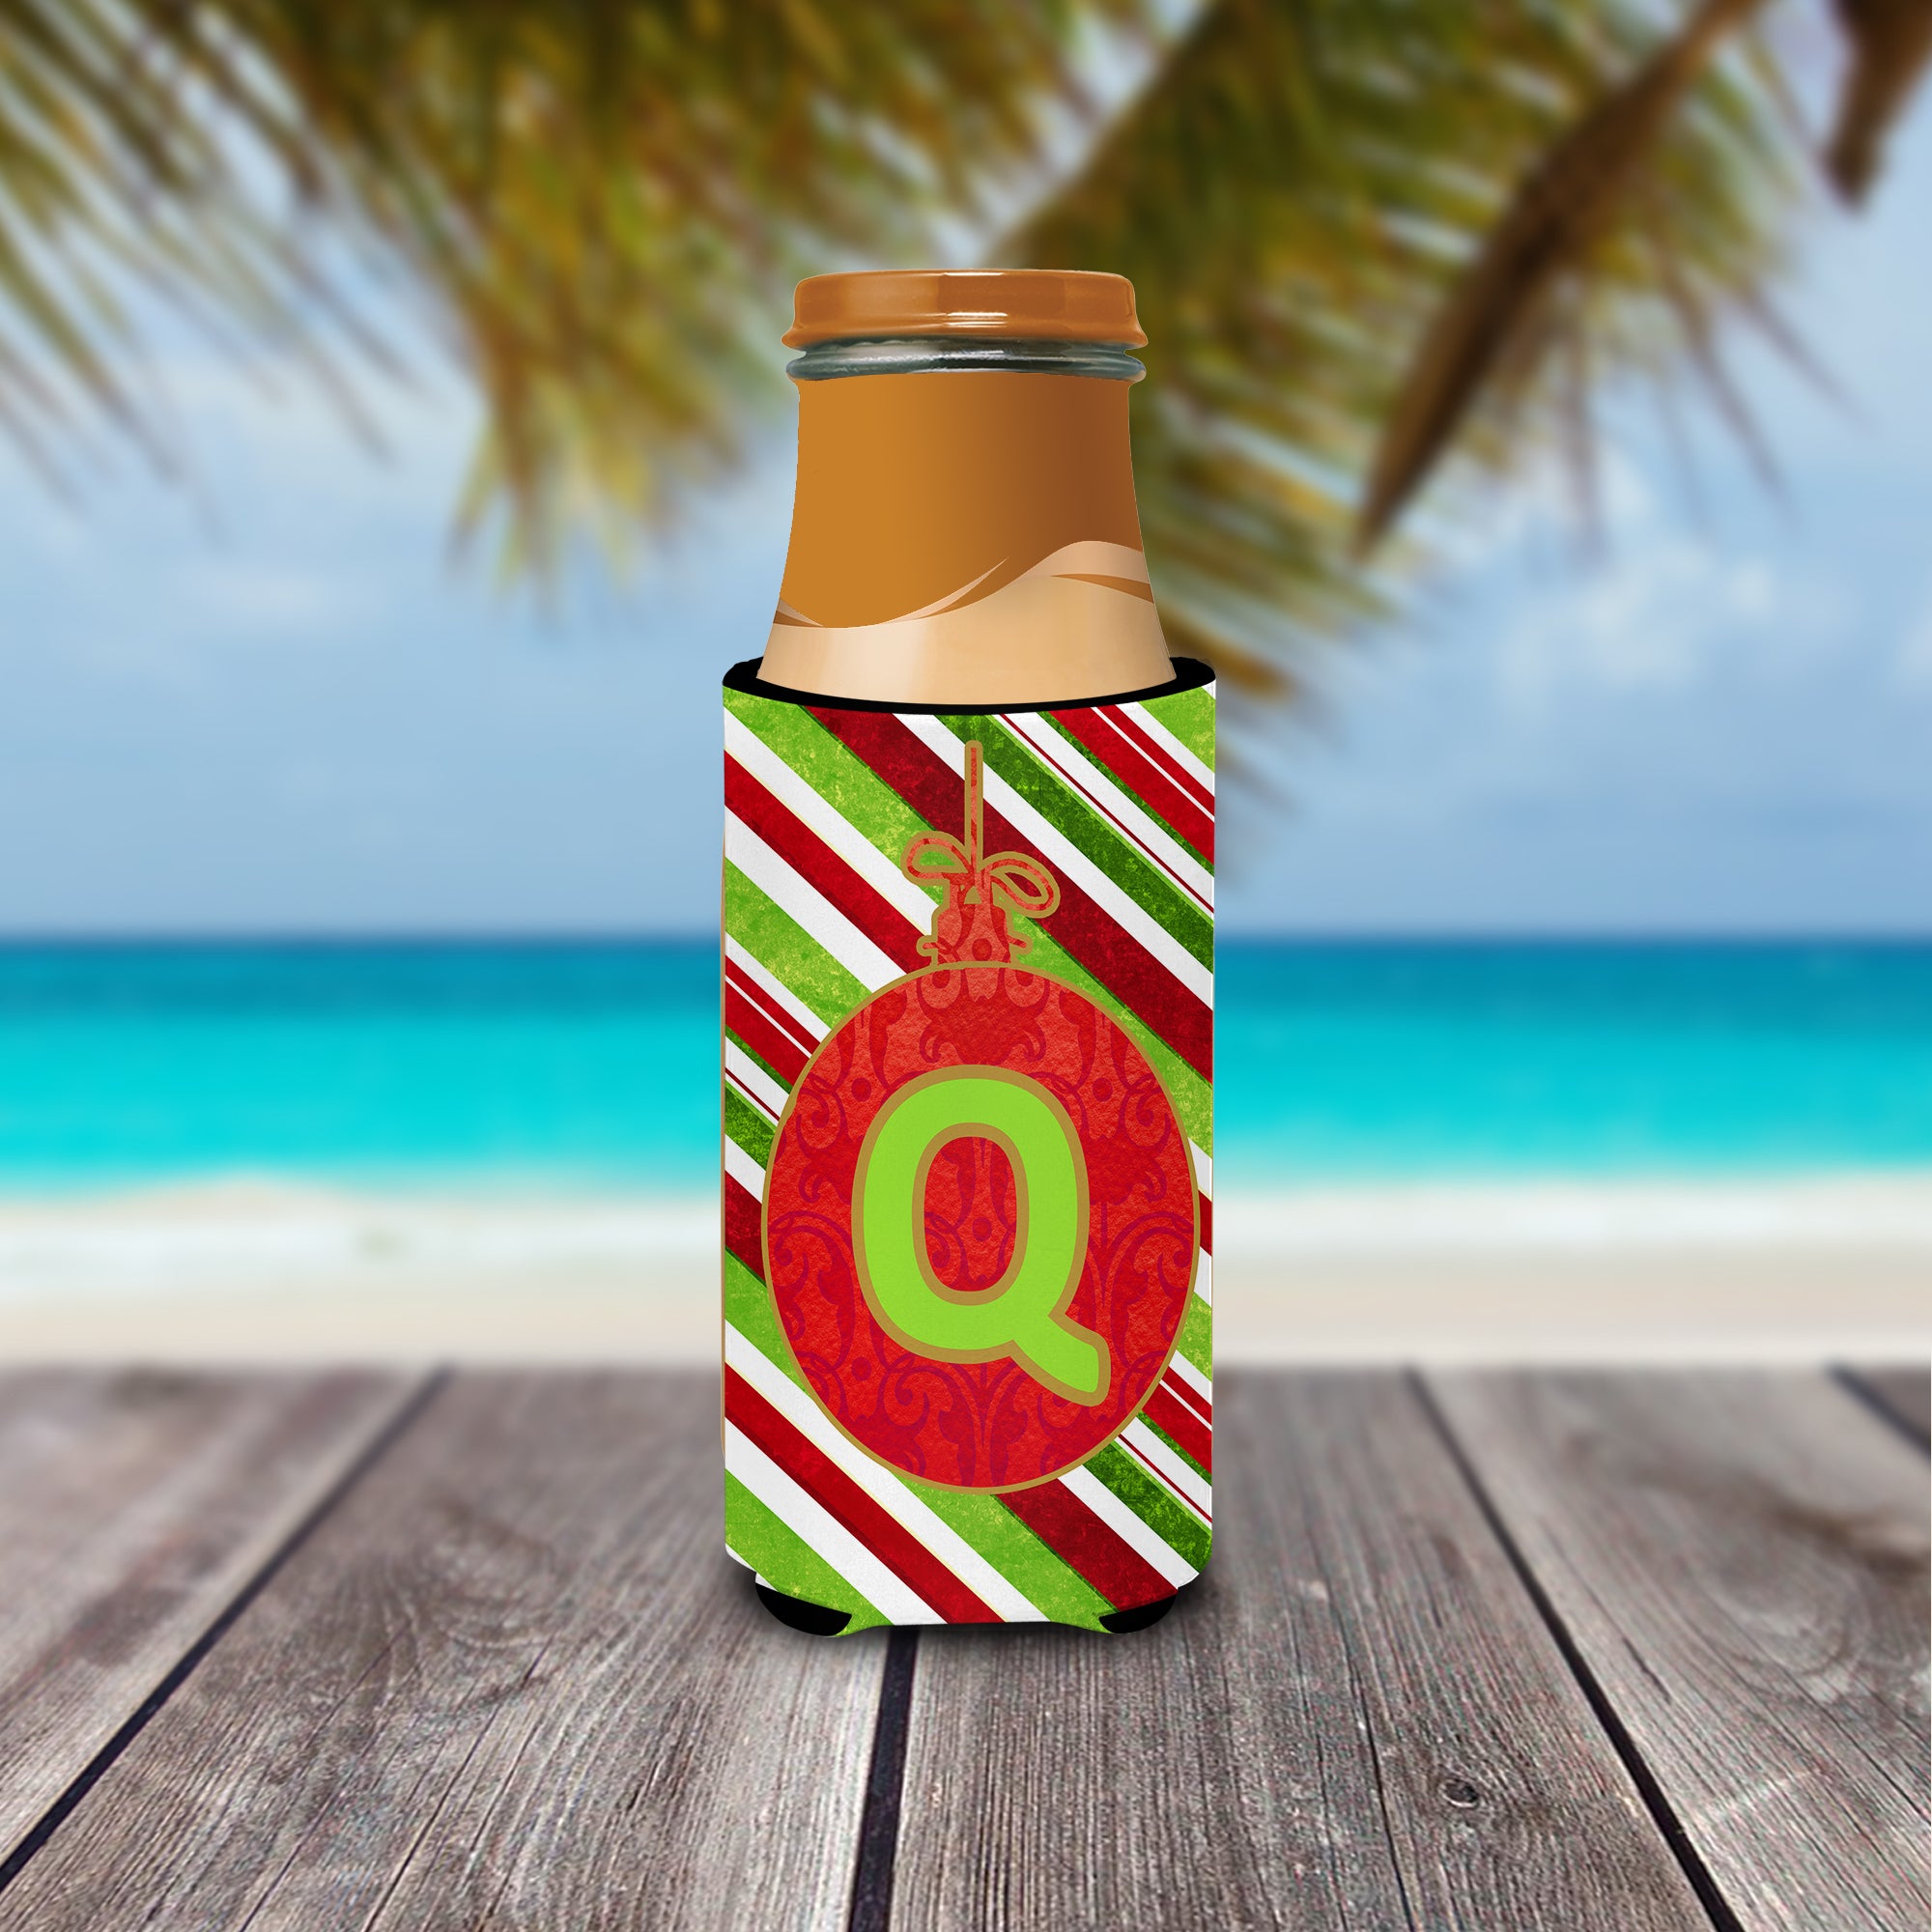 Christmas Oranment Holiday Monogram Initial  Letter Q Ultra Beverage Insulators for slim cans CJ1039-QMUK